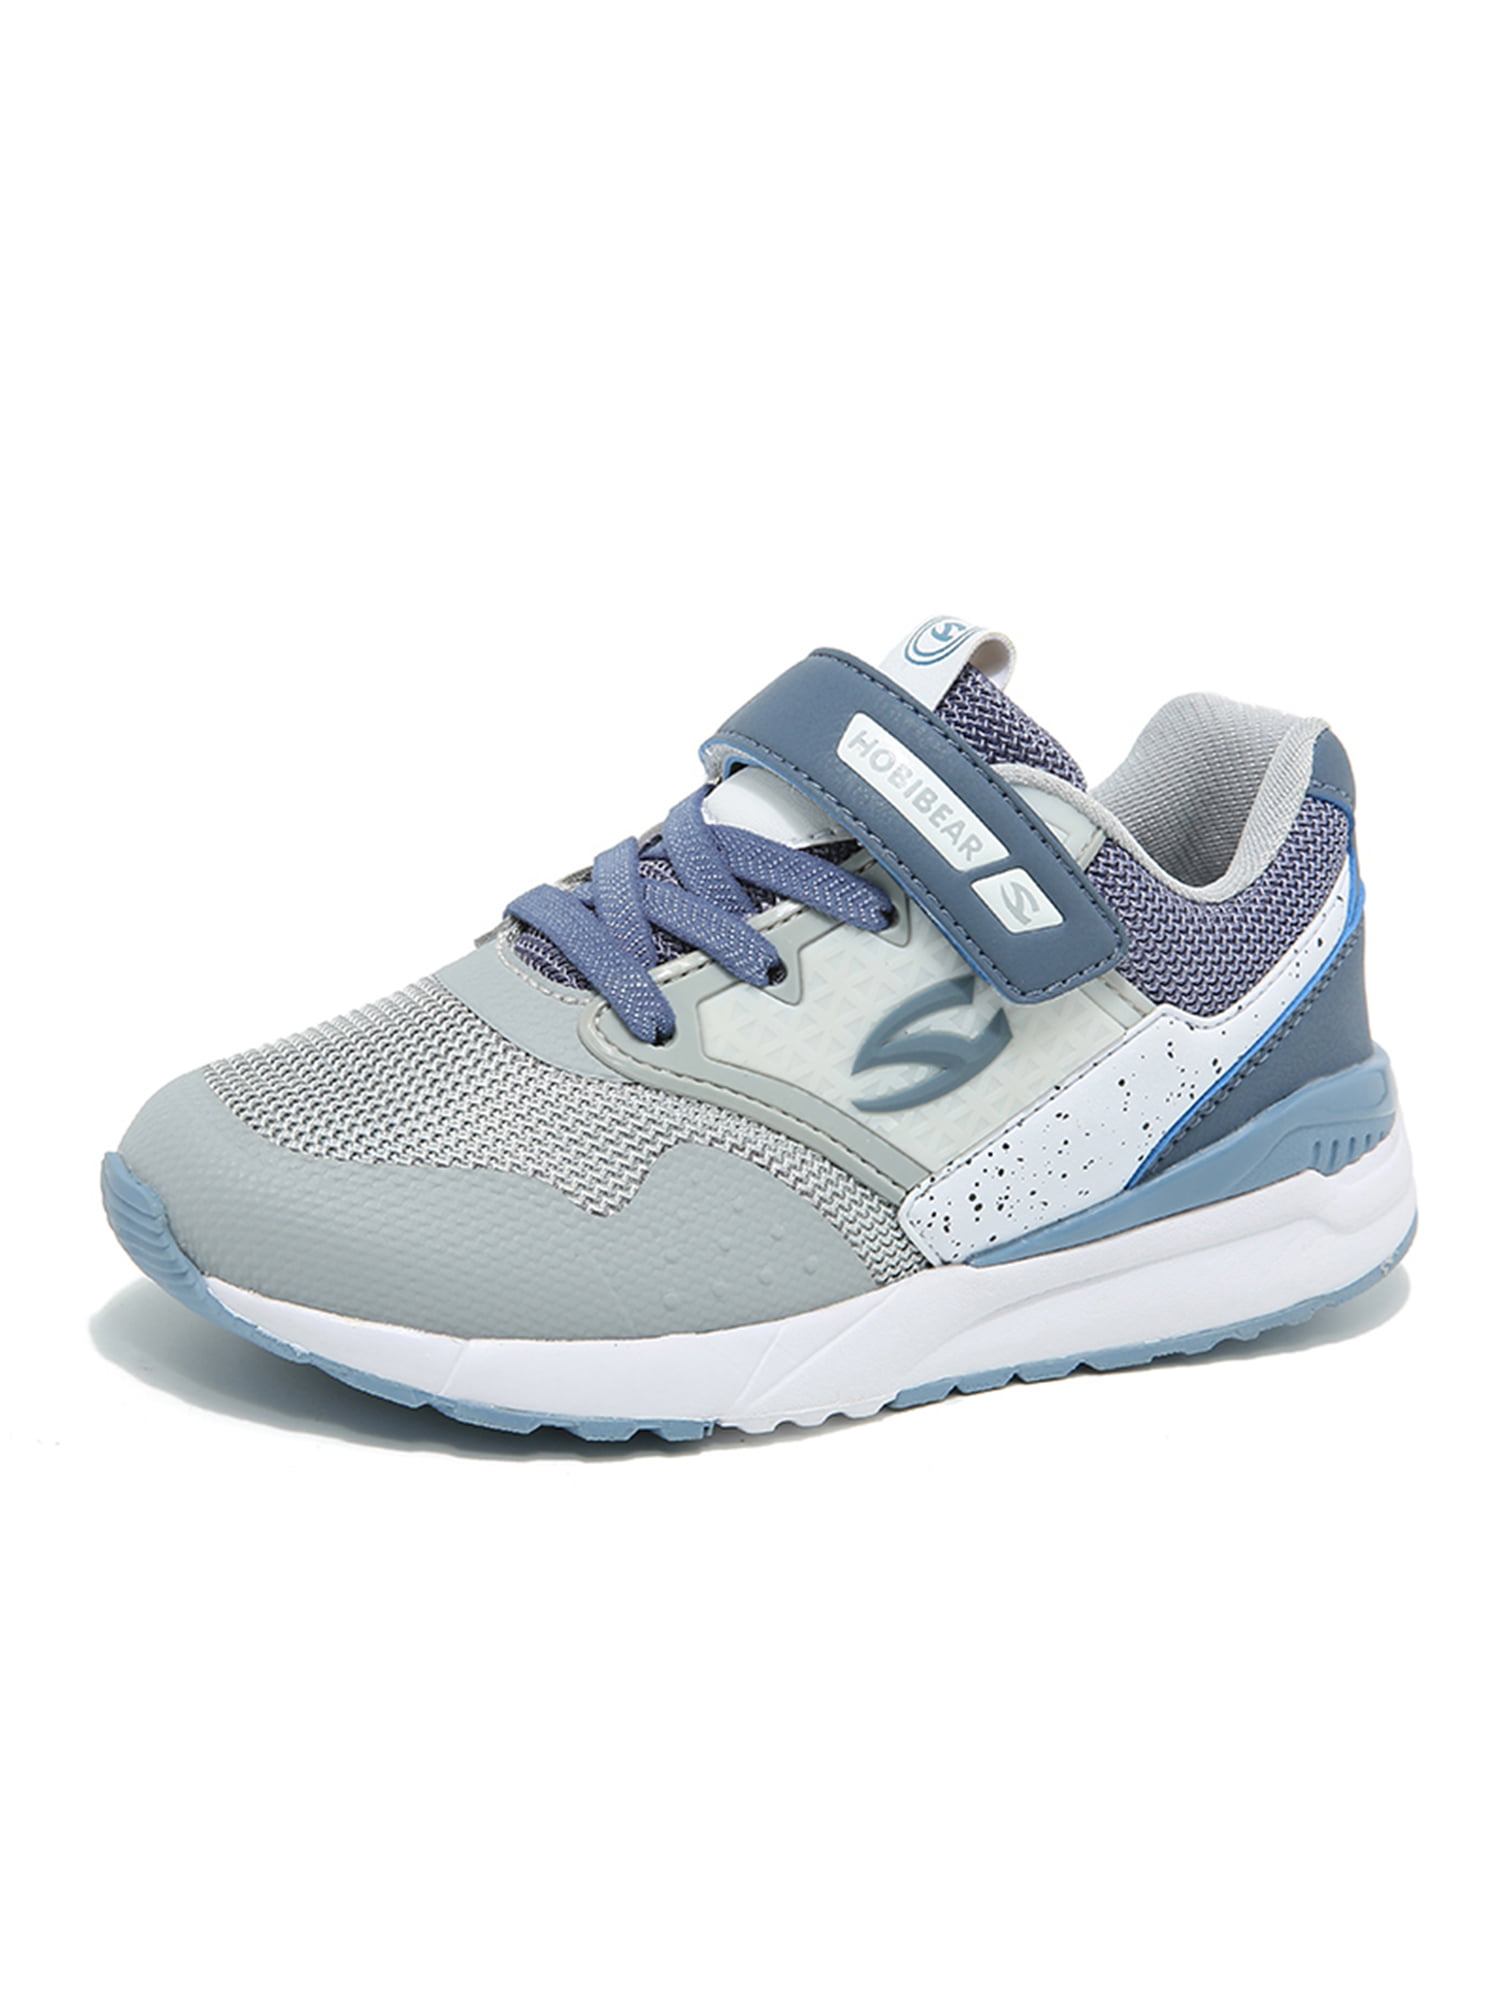 Details about   Kids Girls Soft Sneakers Athletic Running Shoes Casual Outdoor Sports Trainers D 